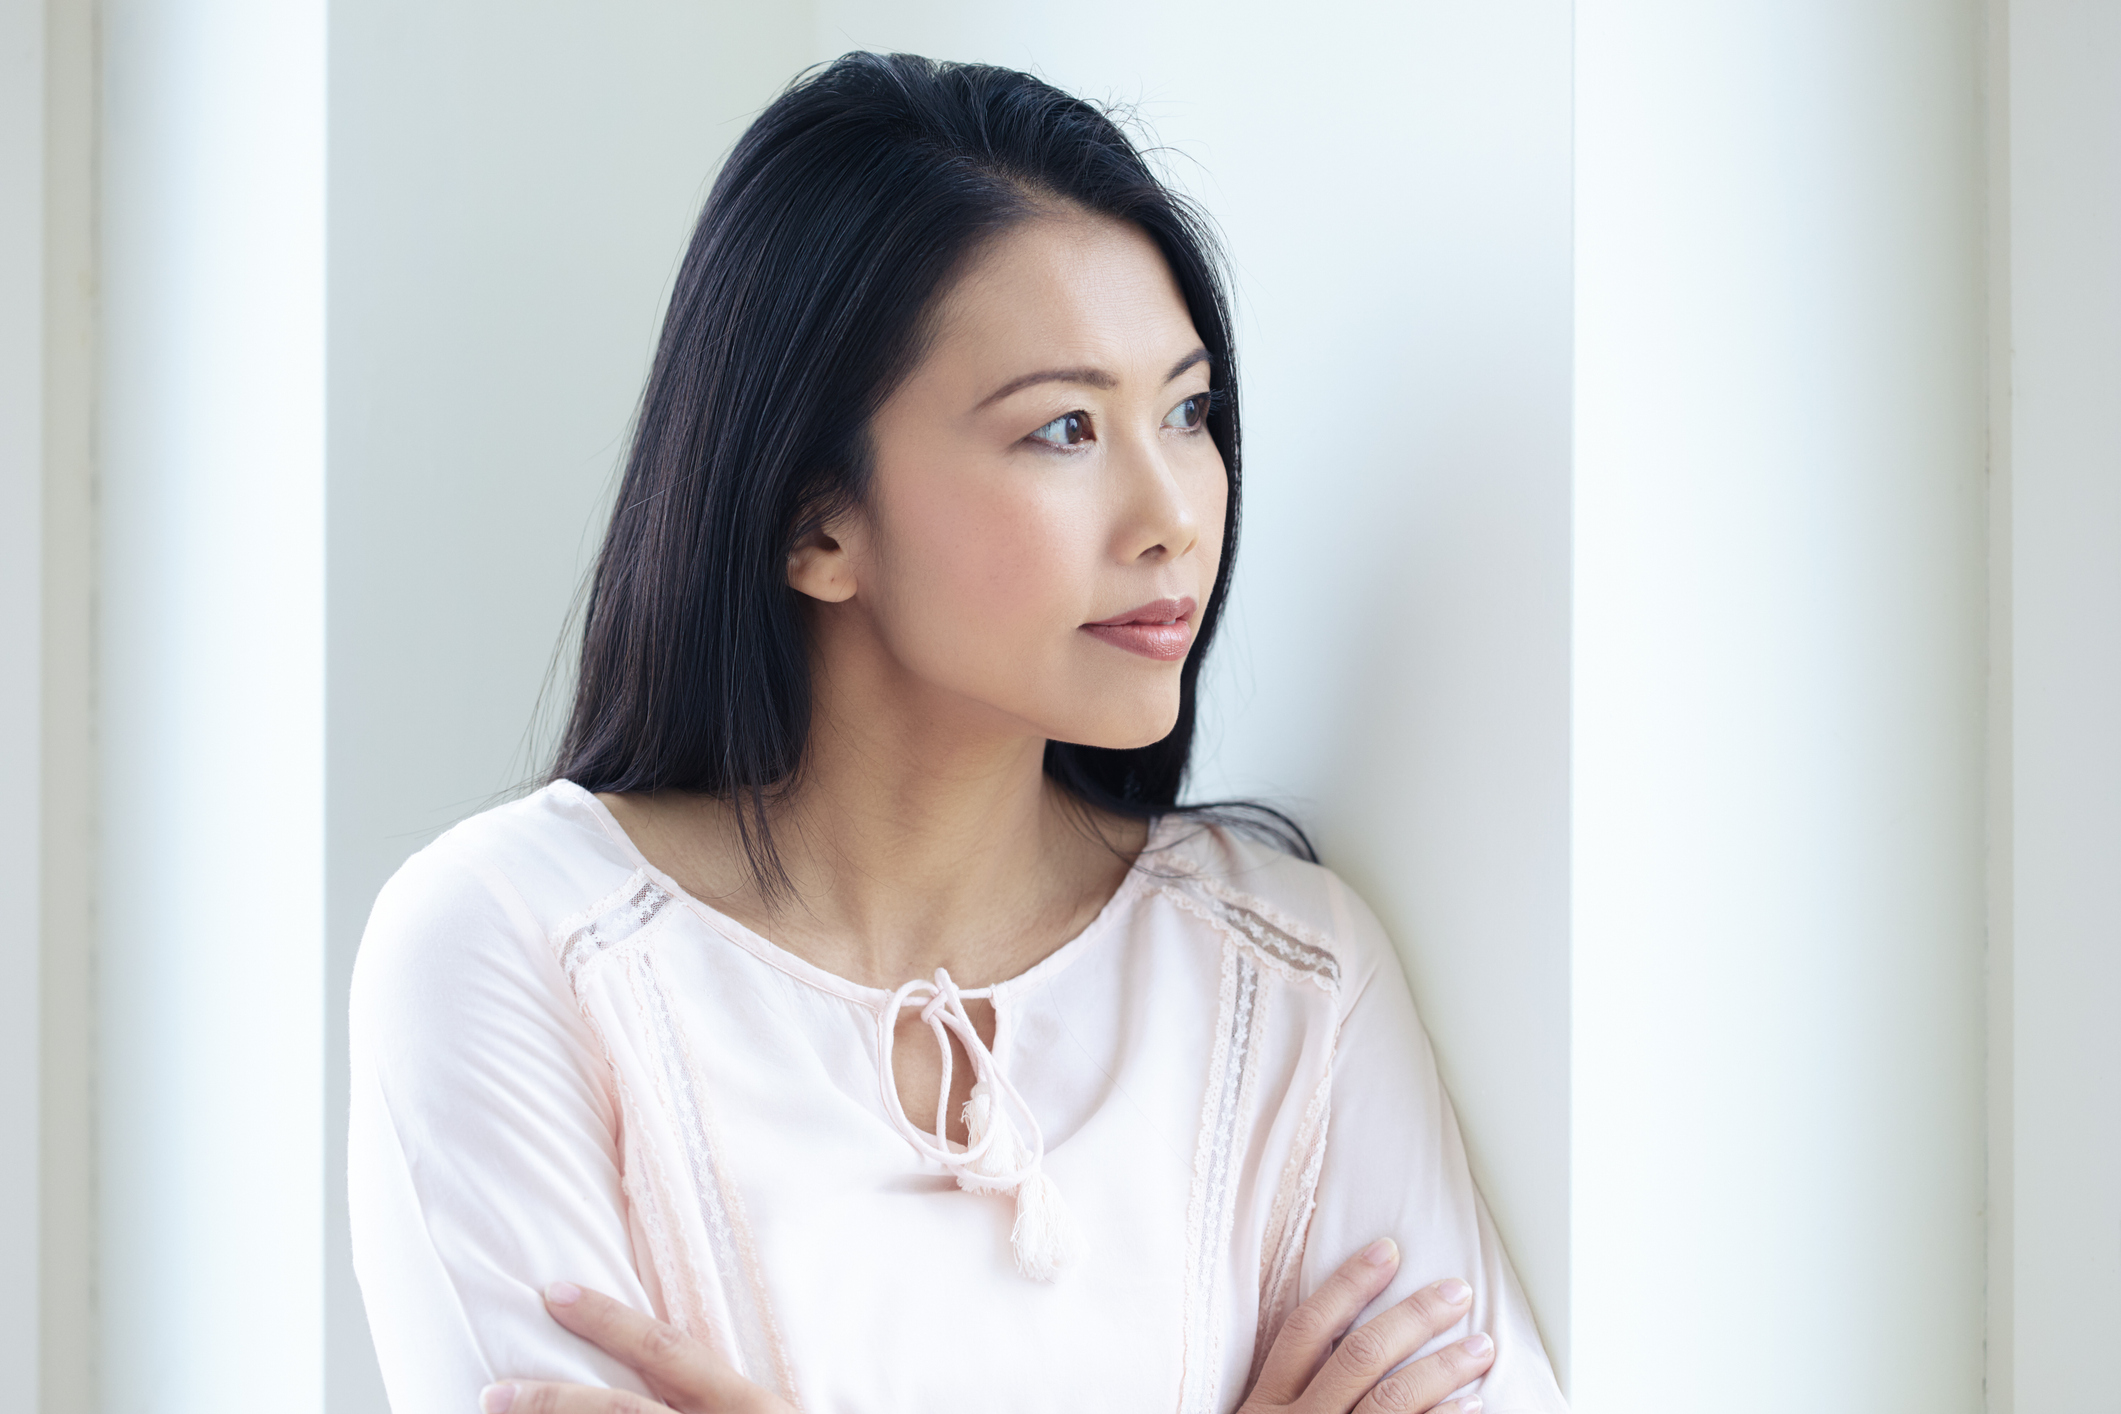 I’m An Asian Woman And I’m Sick Of Being Spoken For